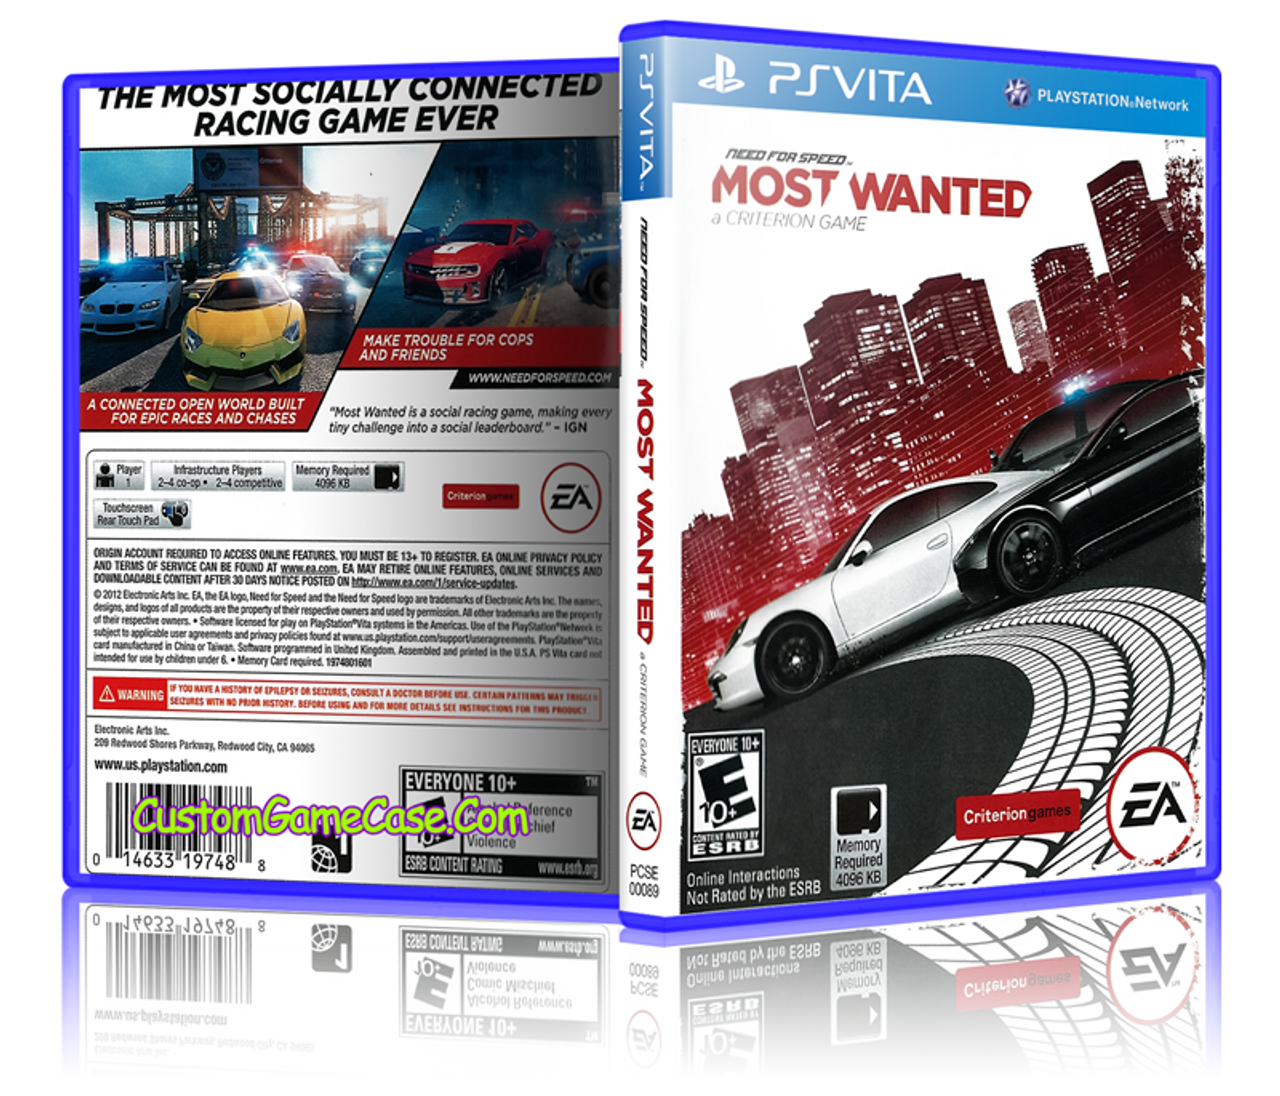 need for speed ps vita